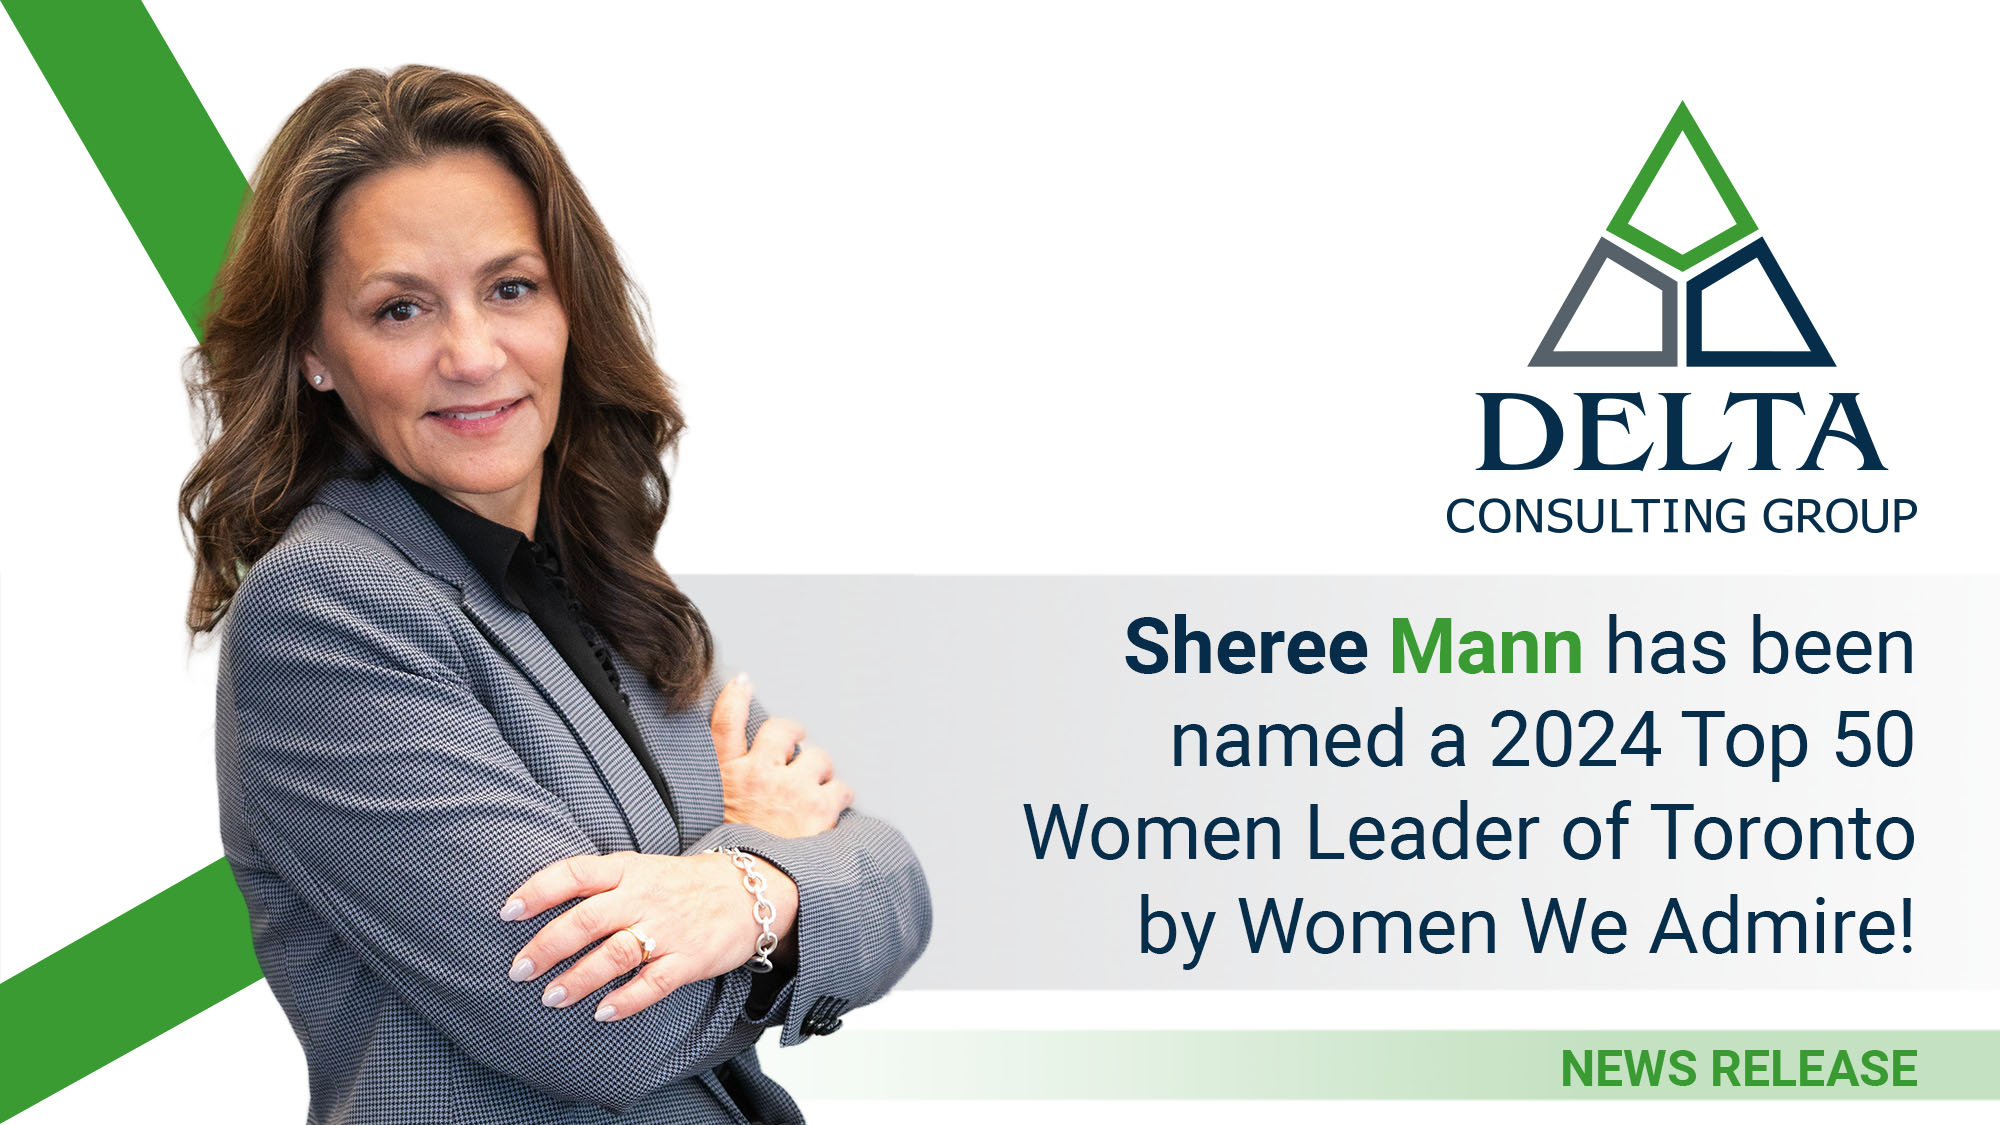 Sheree Mann has been named a 2024 Top 50 Women Leader of Toronto by Women We Admire!